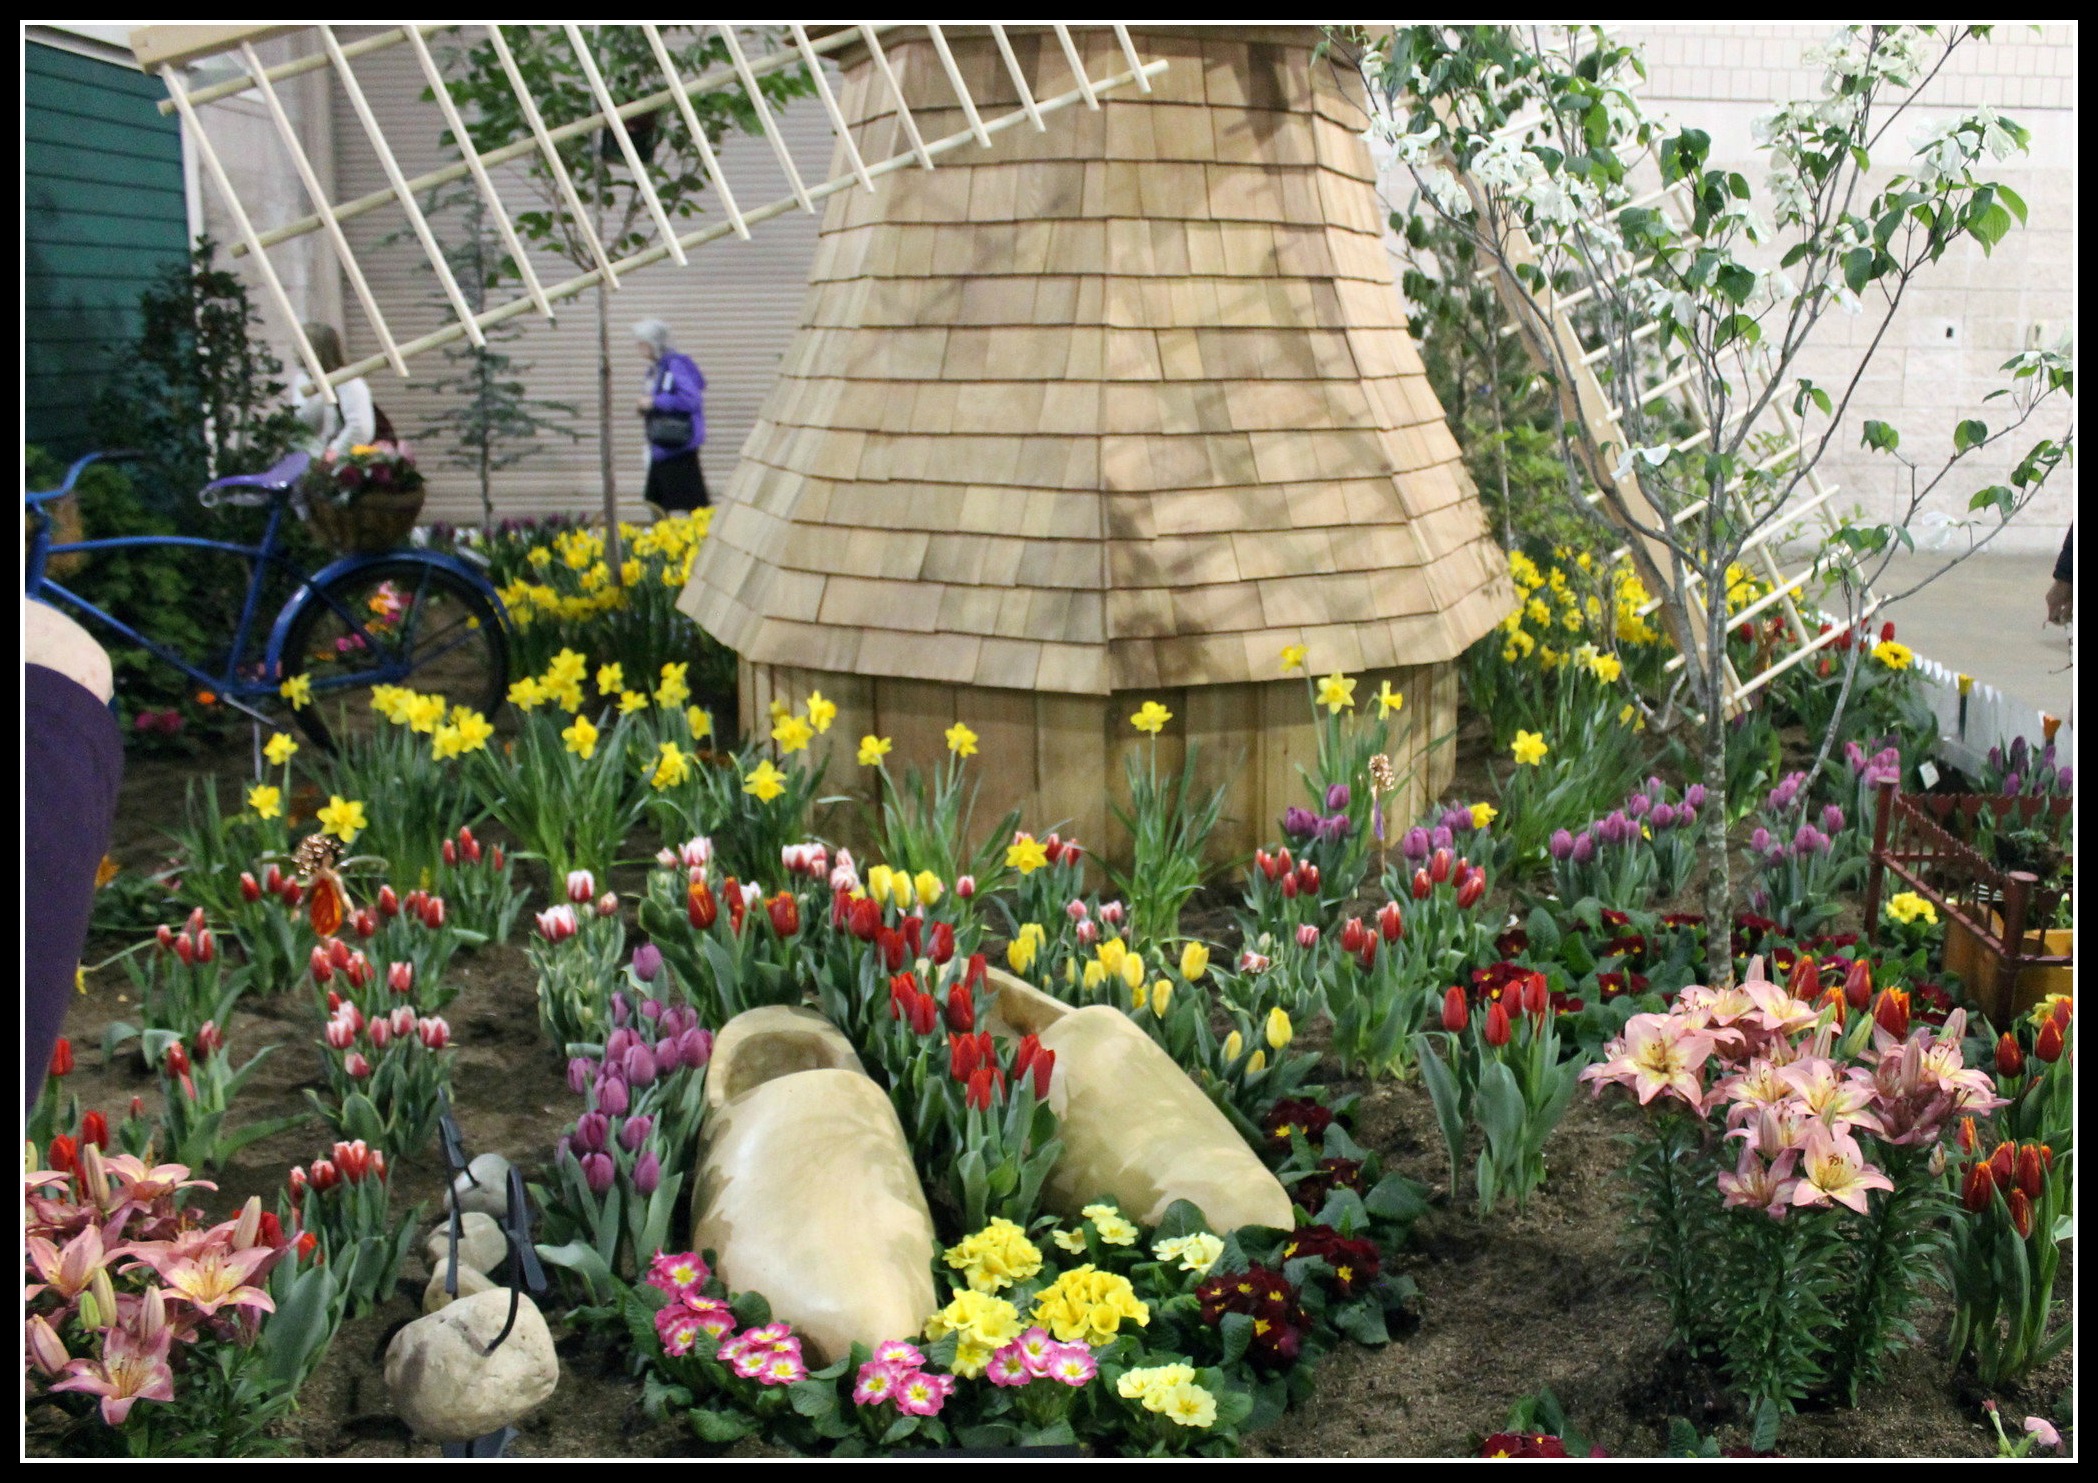 2017 Philly Flower Show. Tip-Toe Through the Tulips. Holland: Flowering the World.